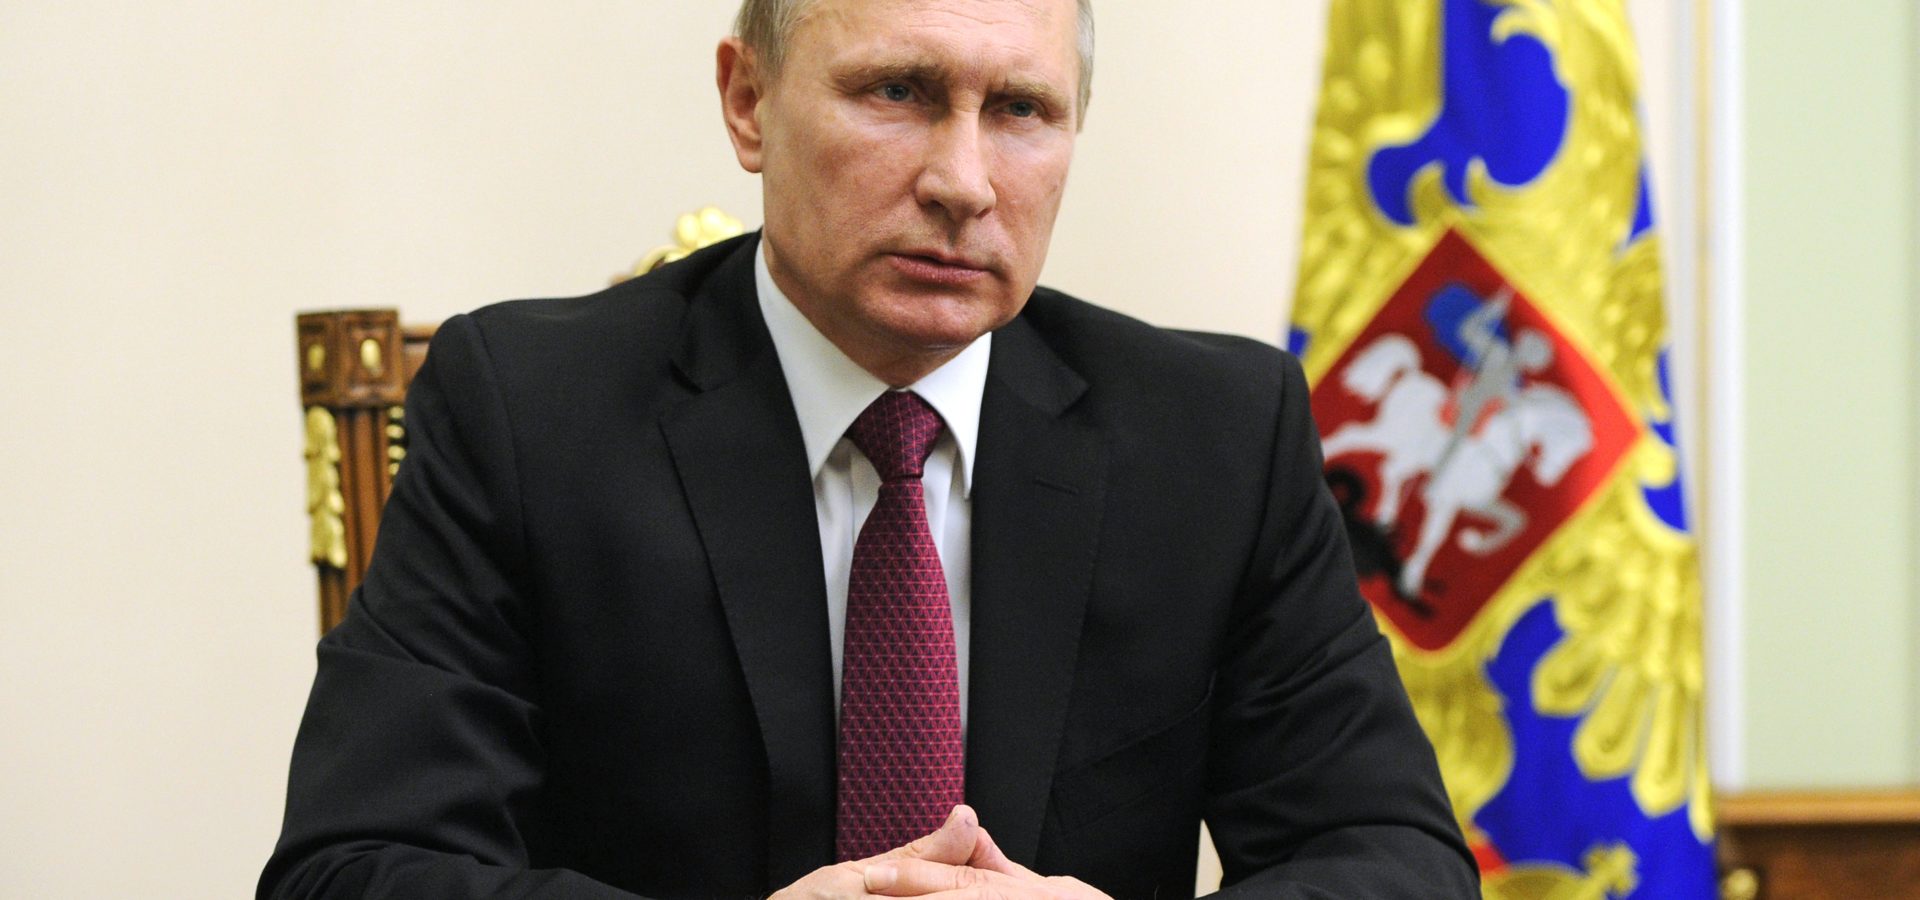 Russian President Vladimir Putin is seen during his speech with a special message after his telephone conversation with U.S. President Barack Obama at the Novo-Ogaryovo residence outside Moscow, Russia, Monday, Feb. 22, 2016. The U.N. special envoy for Syria, Staffan de Mistura, says the cease-fire reached by the United States and Russia and set to begin at midnight Saturday in Syria gives the two world powers the task of making sure that everyone else abides by it, too. (Mikhail Klimentyev/ Sputnik, Kremlin Pool Photo via AP)